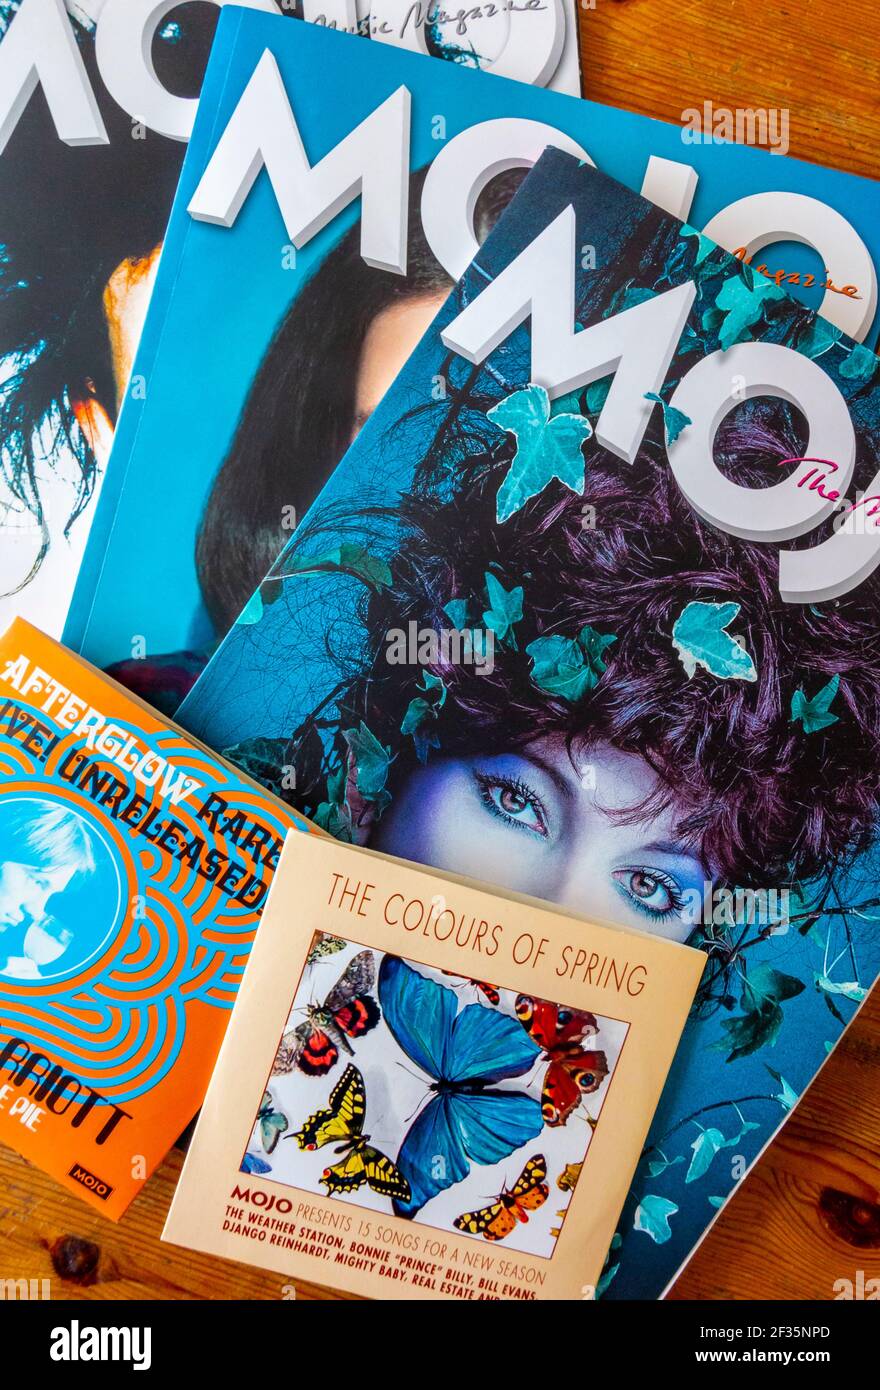 Issues of Mojo a British music magazine that covers heritage rock and new music with a free cover mounted CD that is given away with each copy. Stock Photo